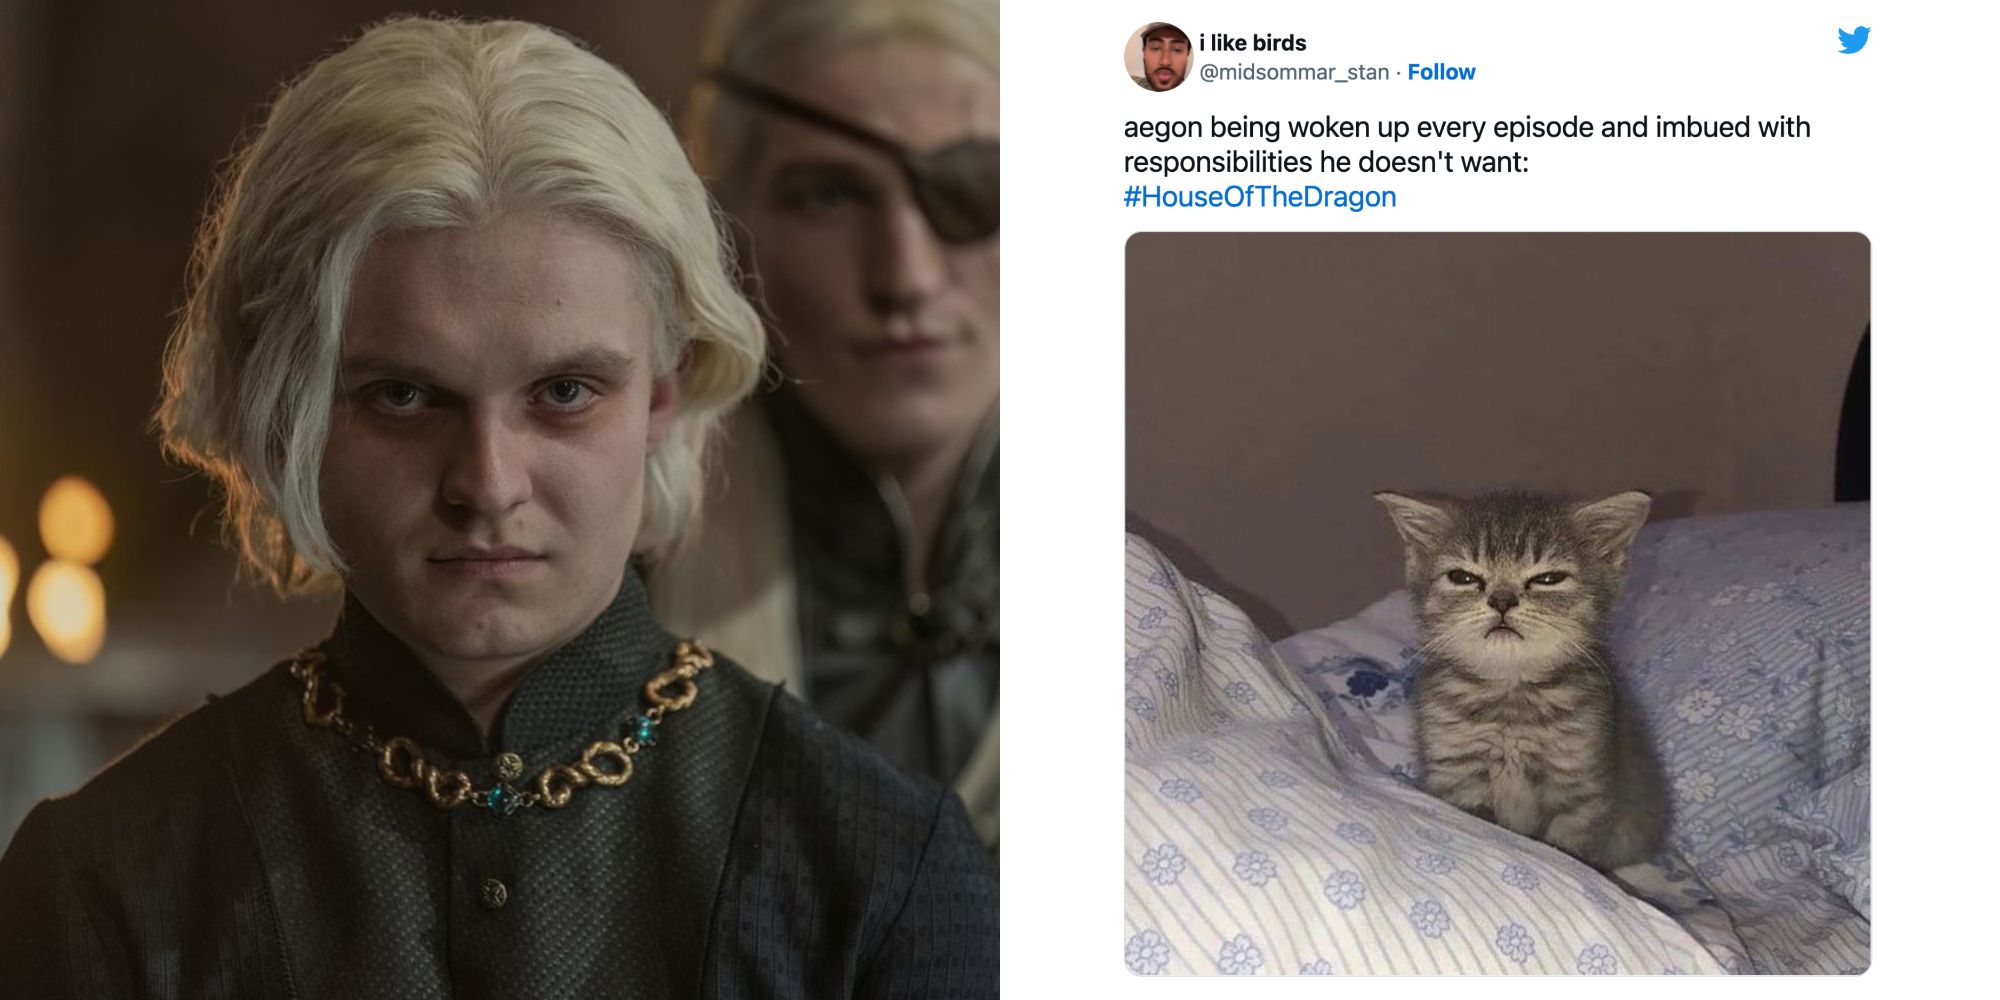 King Aegon Targaryen and a meme about House of the Dragon